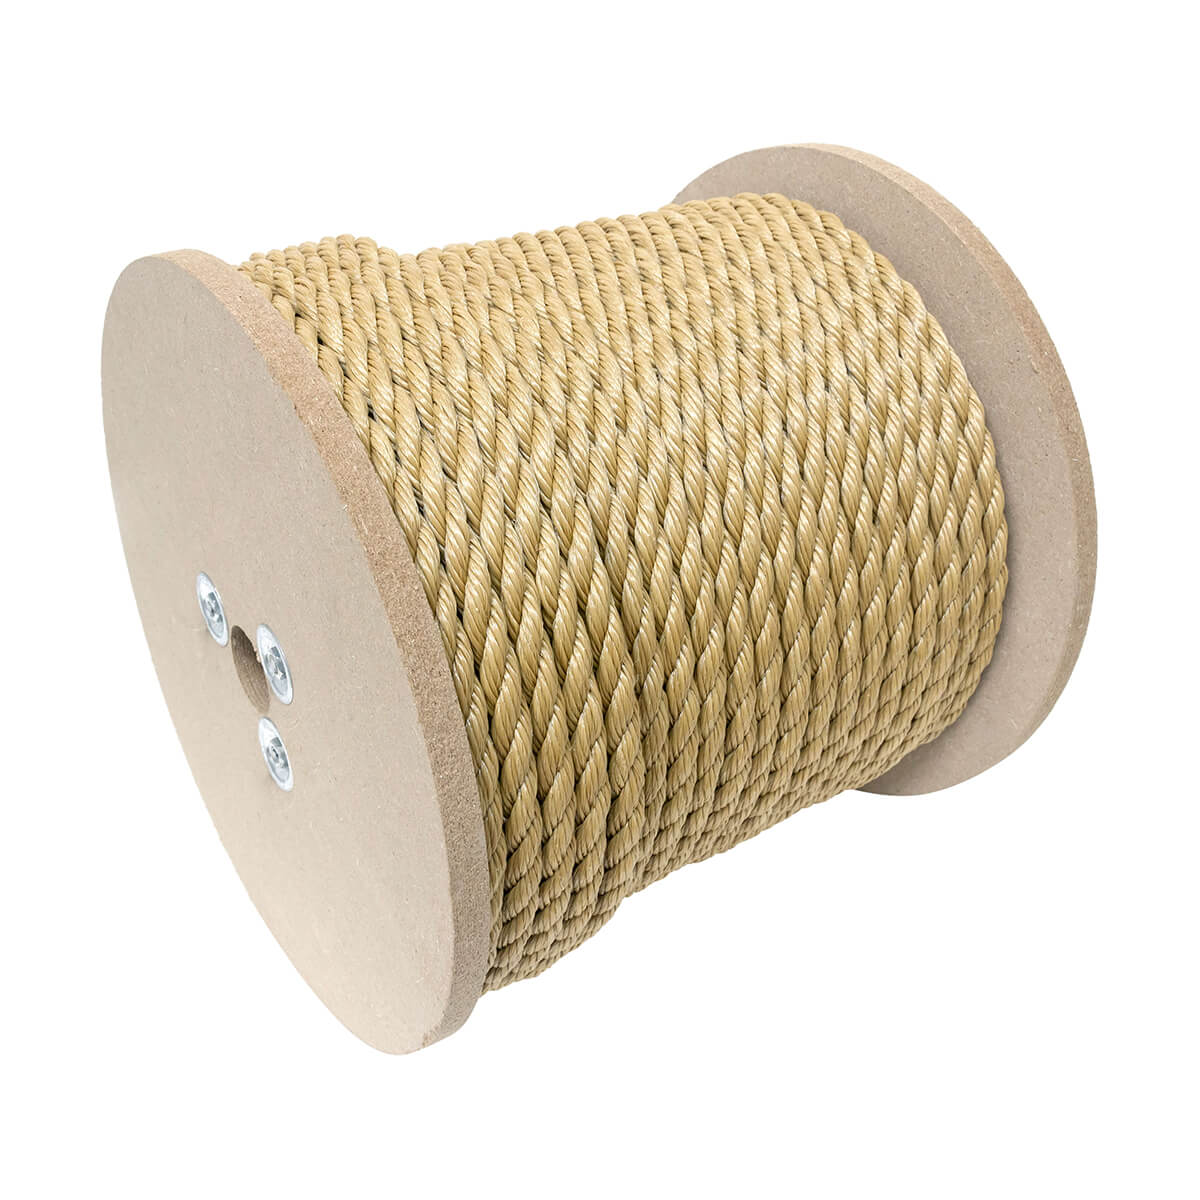 Twisted Polypropylene Rope Reel - Brown - 1/2-in - Price / ft